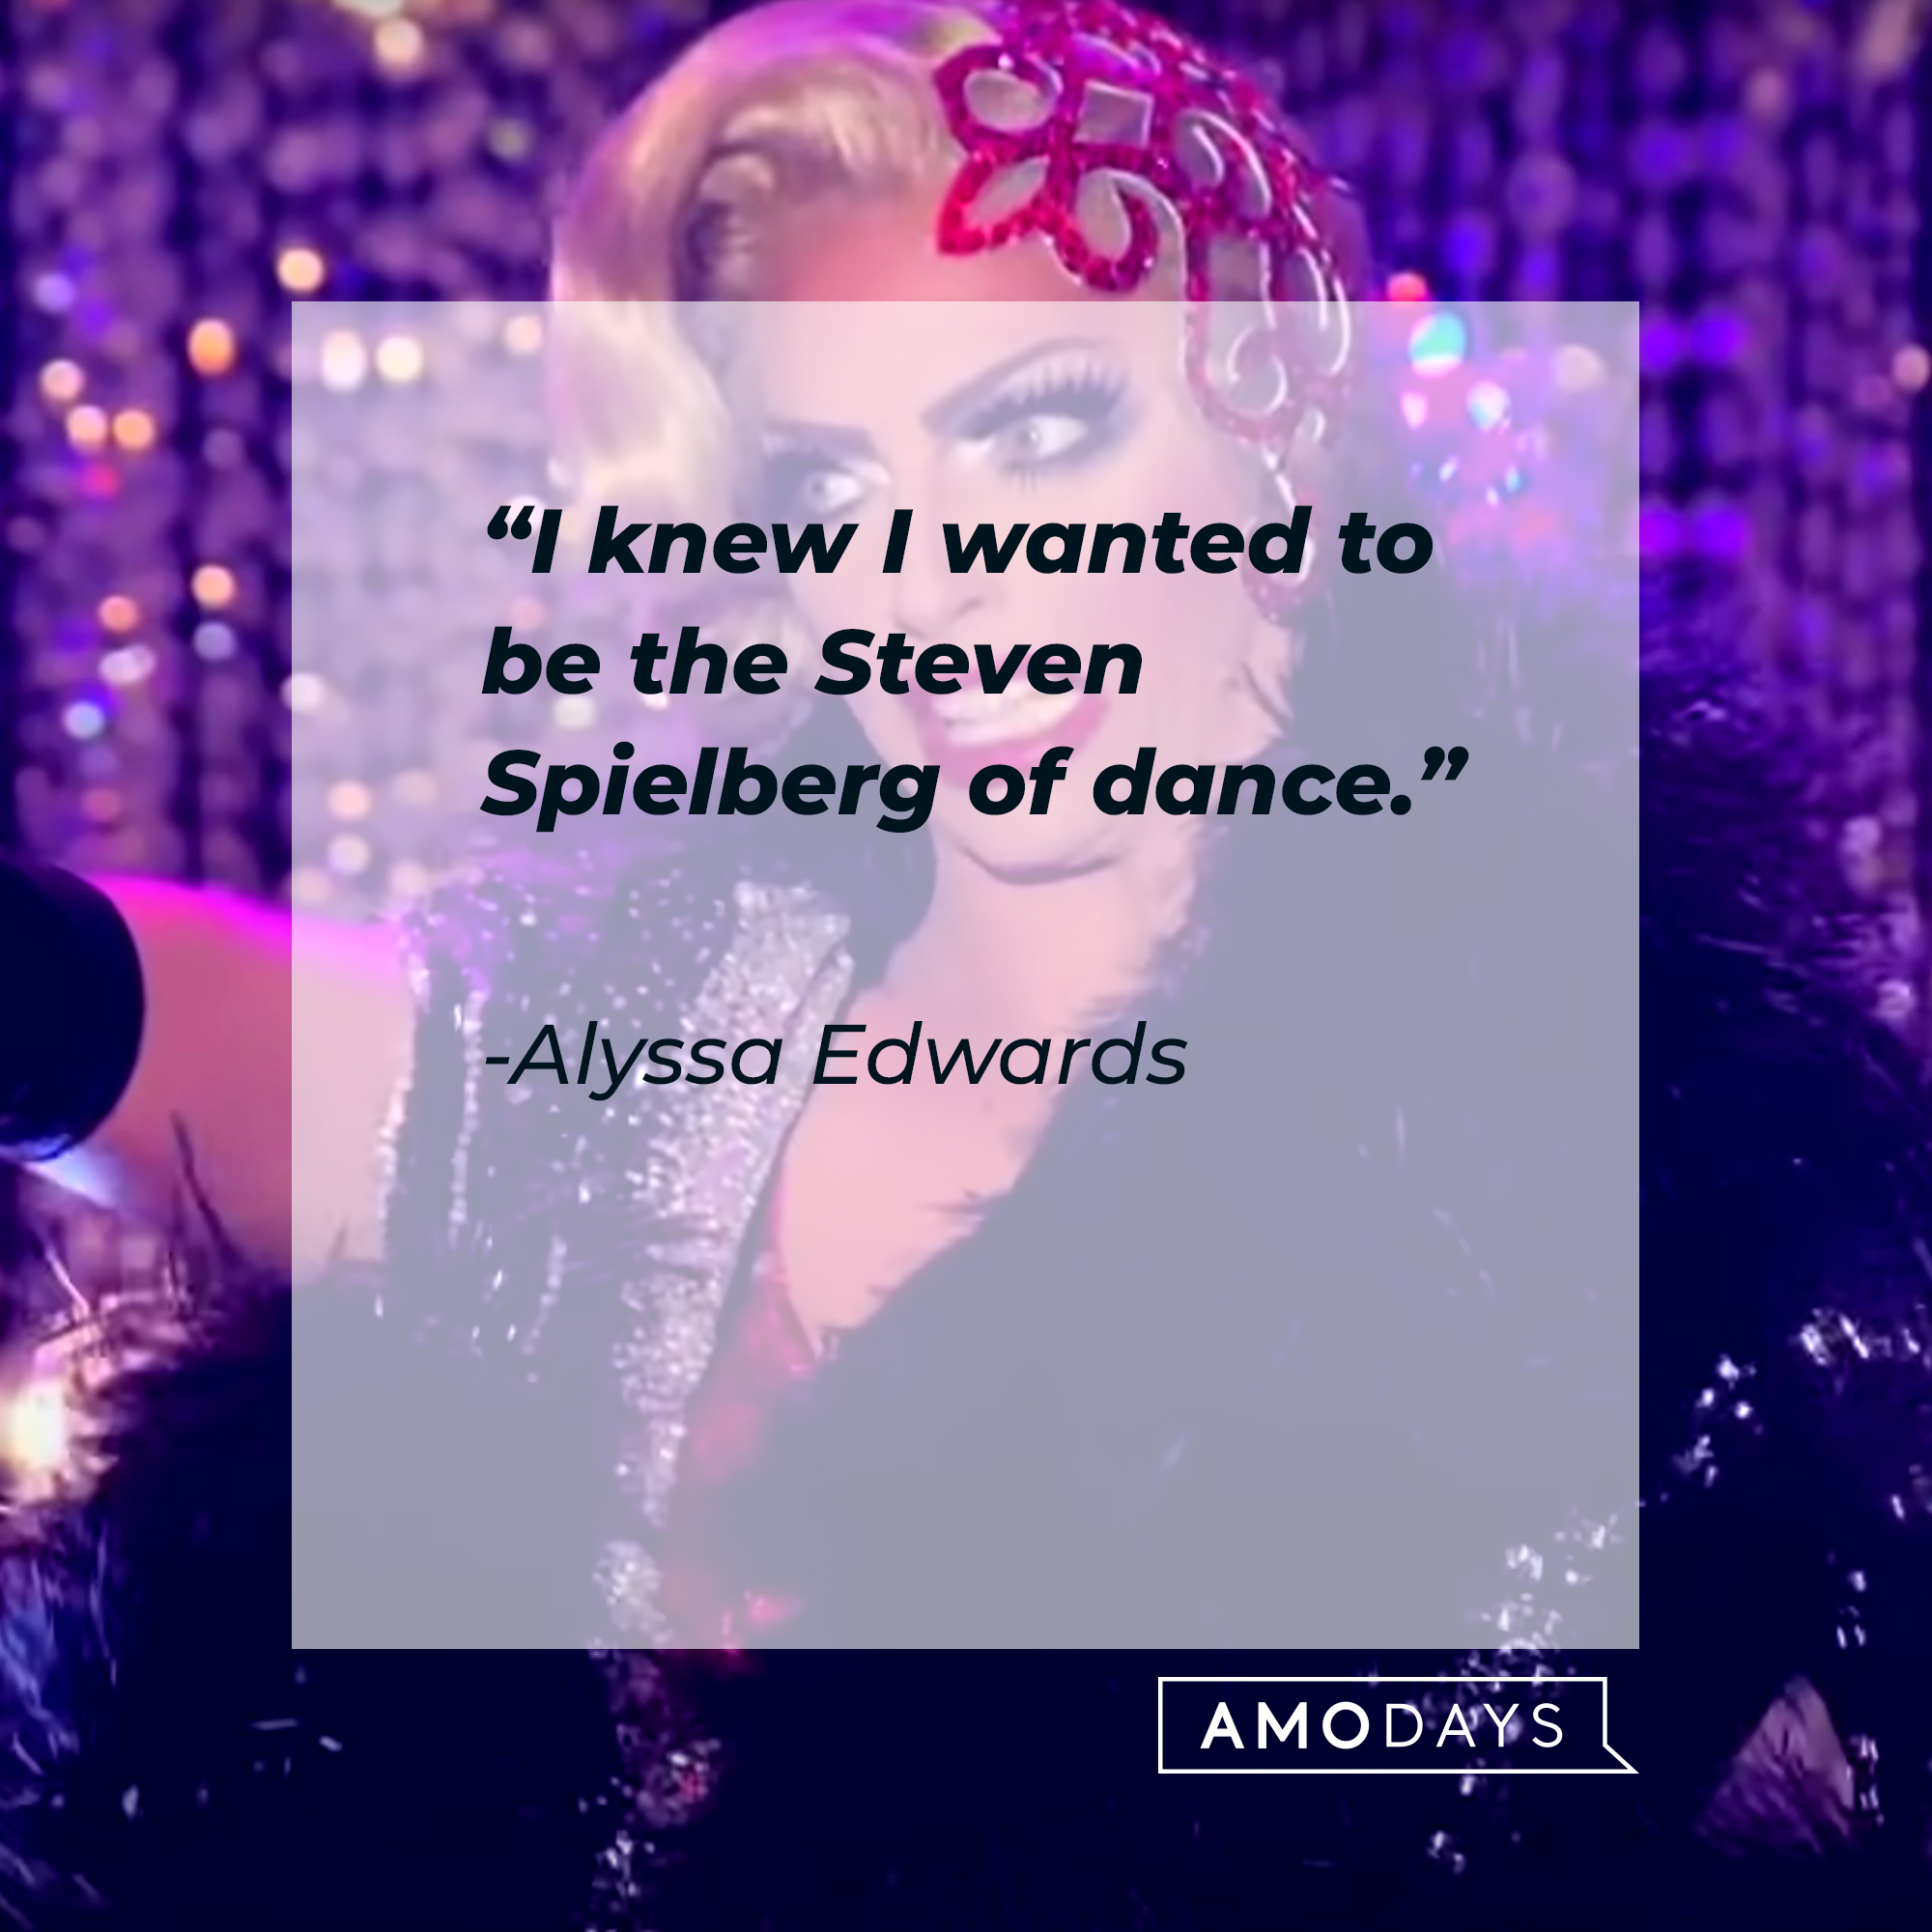 Alyssa Edwards's quote: “I knew I wanted to be the Steven Spielberg of dance.” | Source: youtube.com/rupaulsdragrace